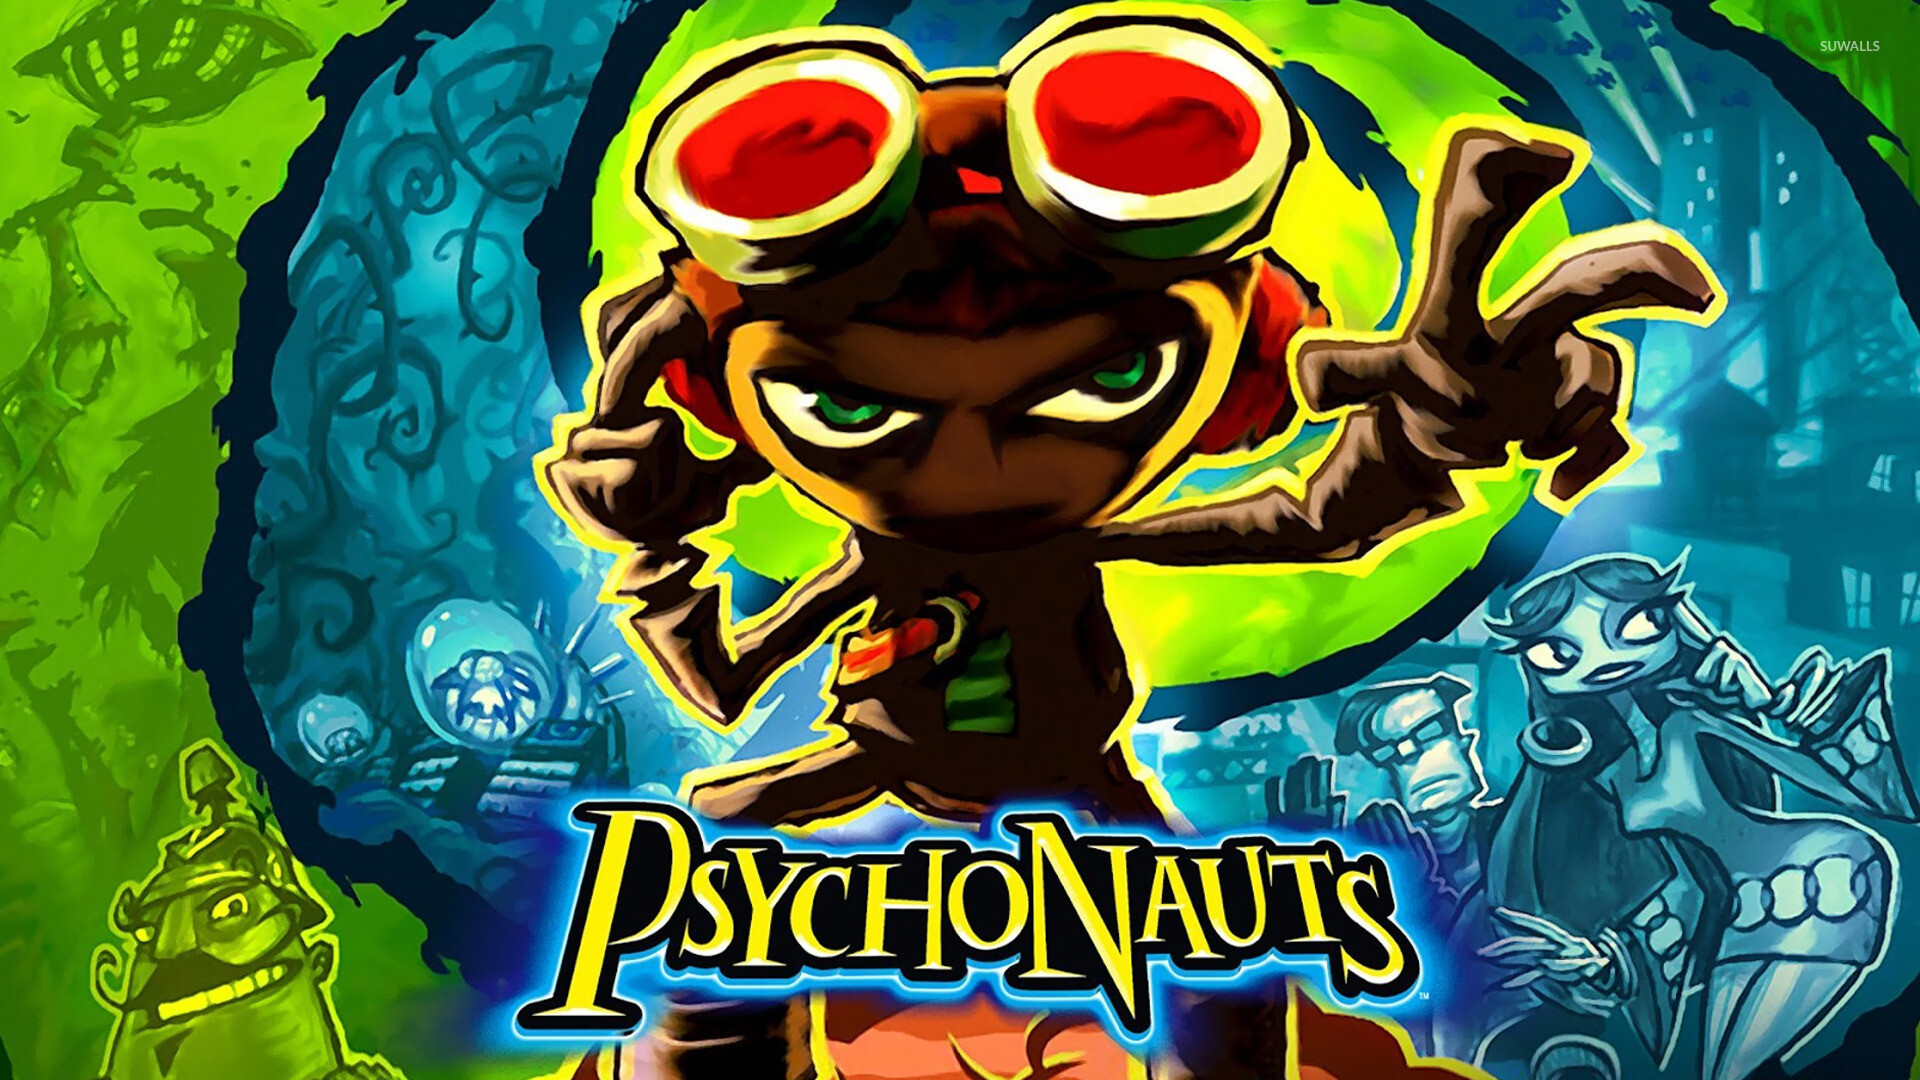 Psychonauts 2: A platform-adventure game with cinematic style. 1920x1080 Full HD Background.